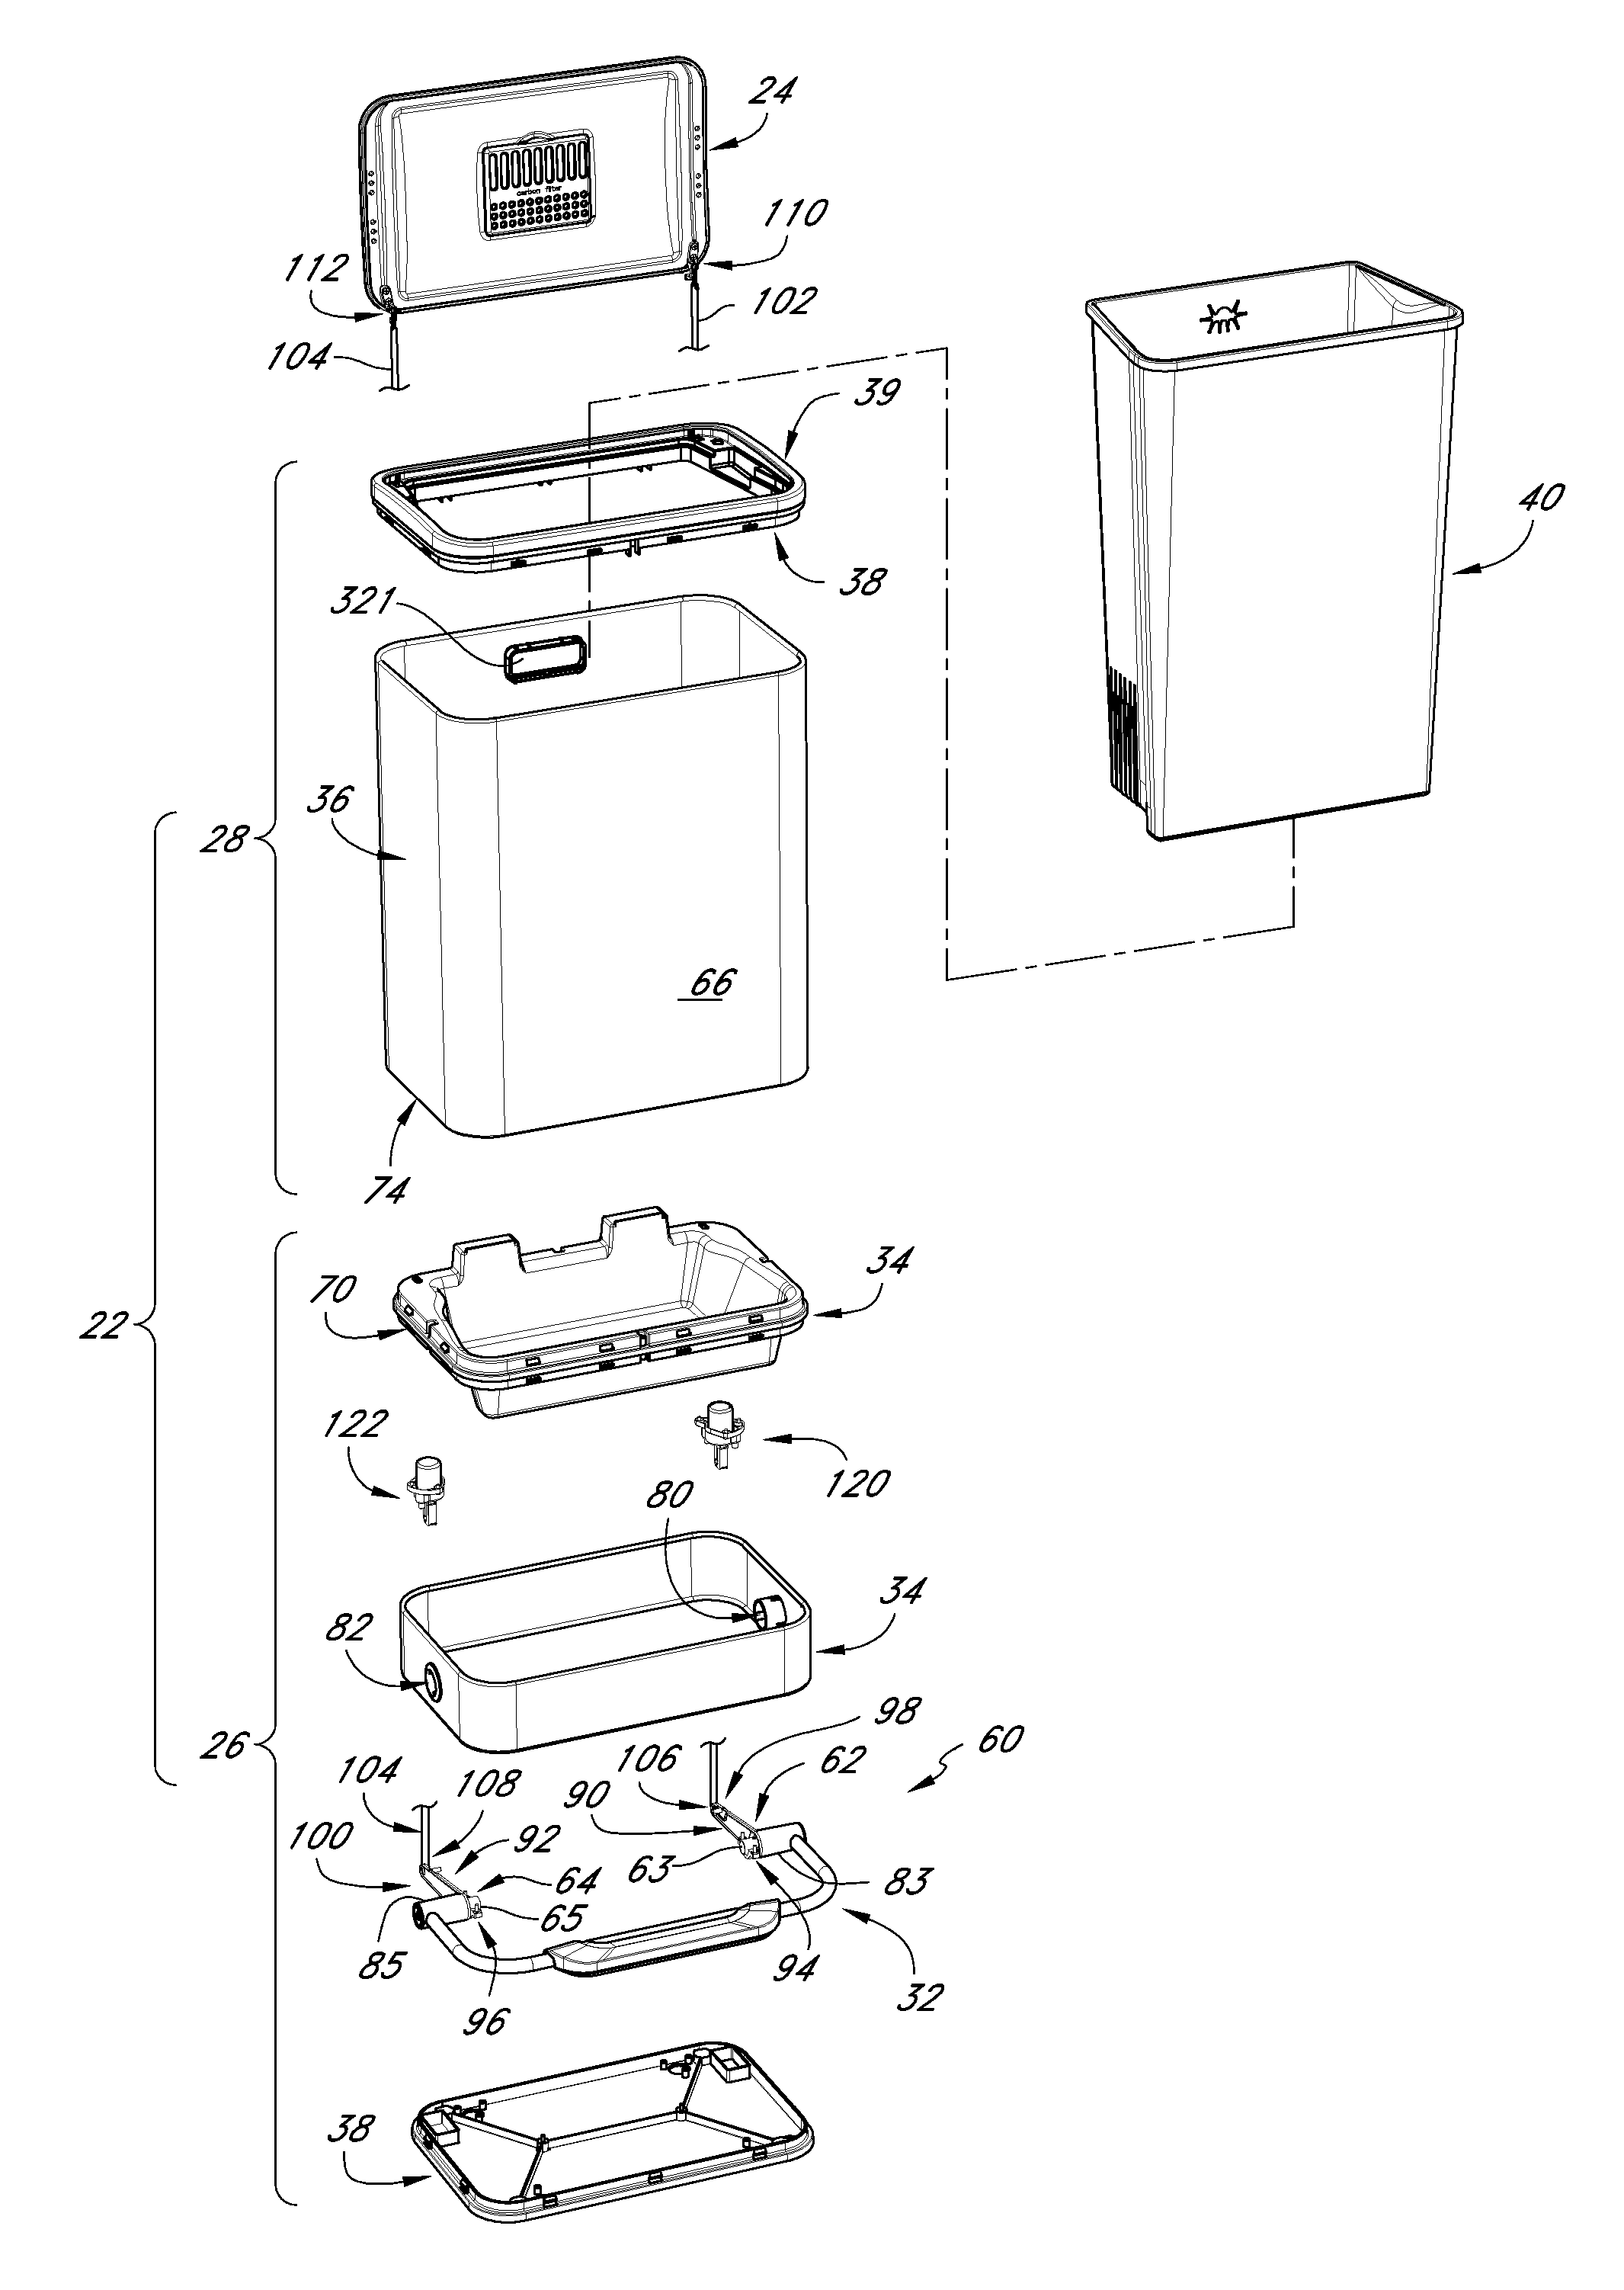 Receptacle with motion dampers for lid and air filtration device